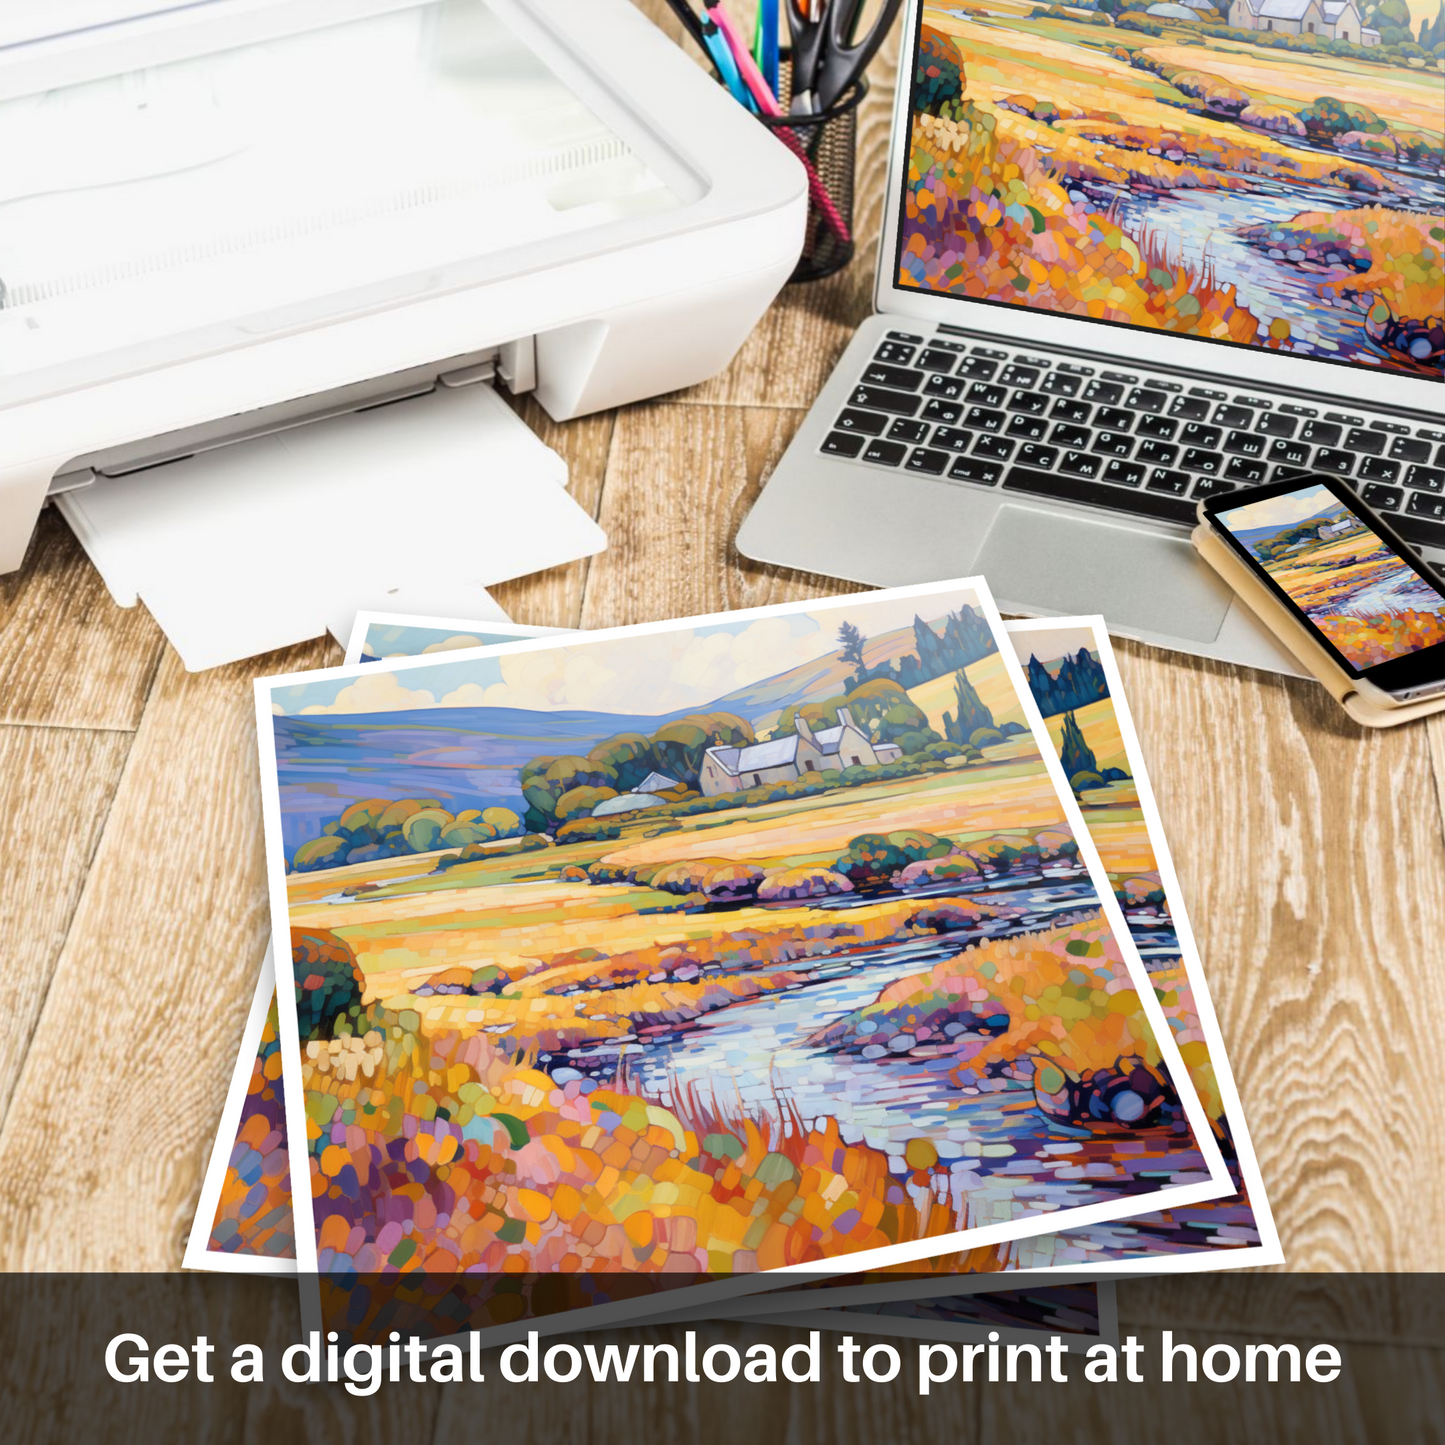 Downloadable and printable picture of Glenlivet, Moray in summer